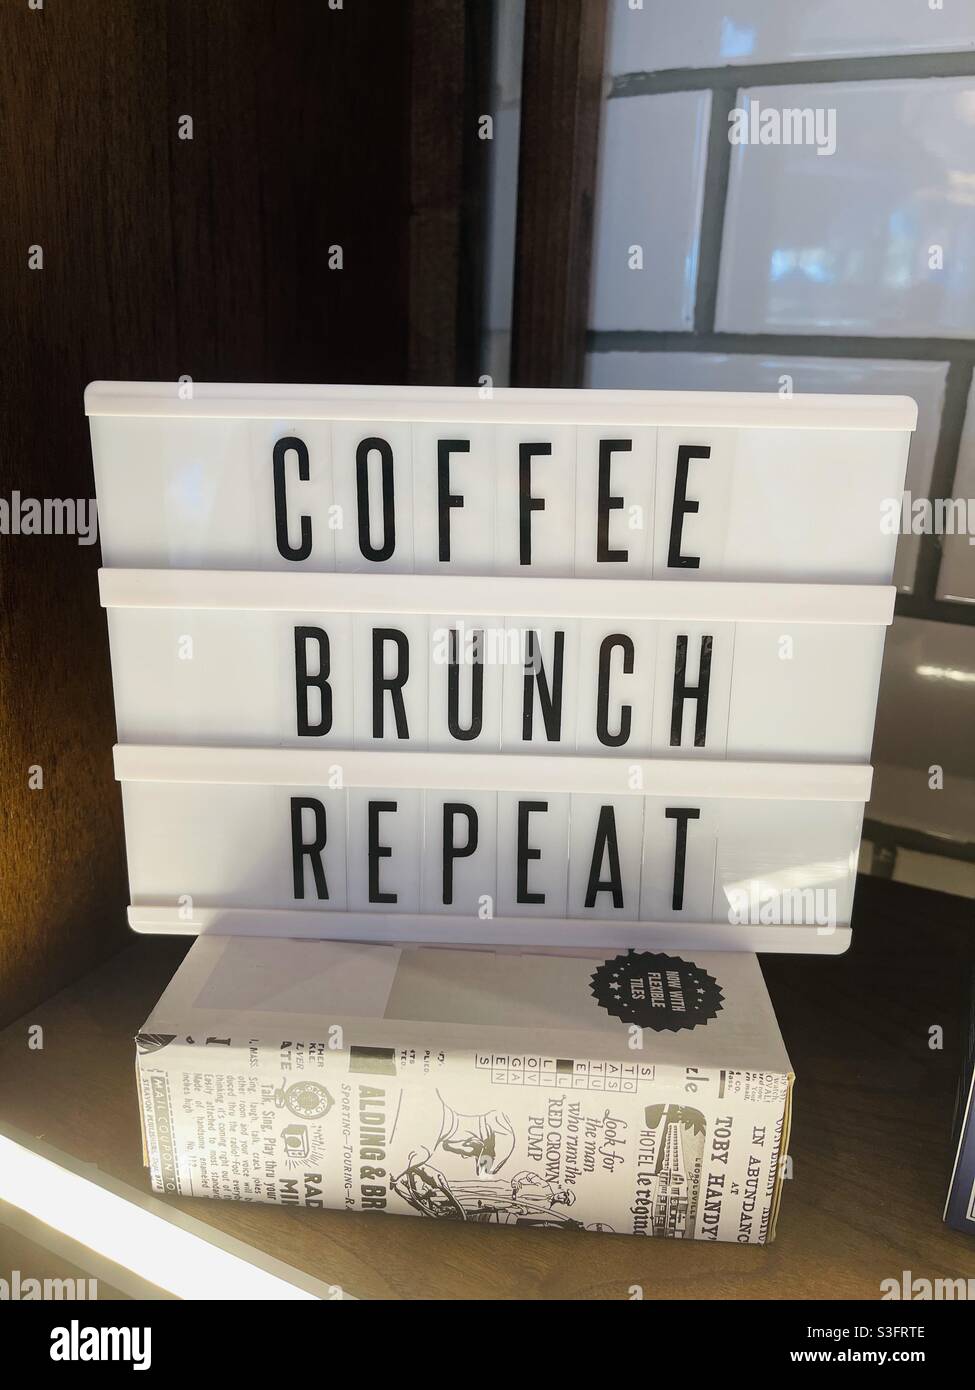 coffee, brunch, repeat, signage Stock Photo